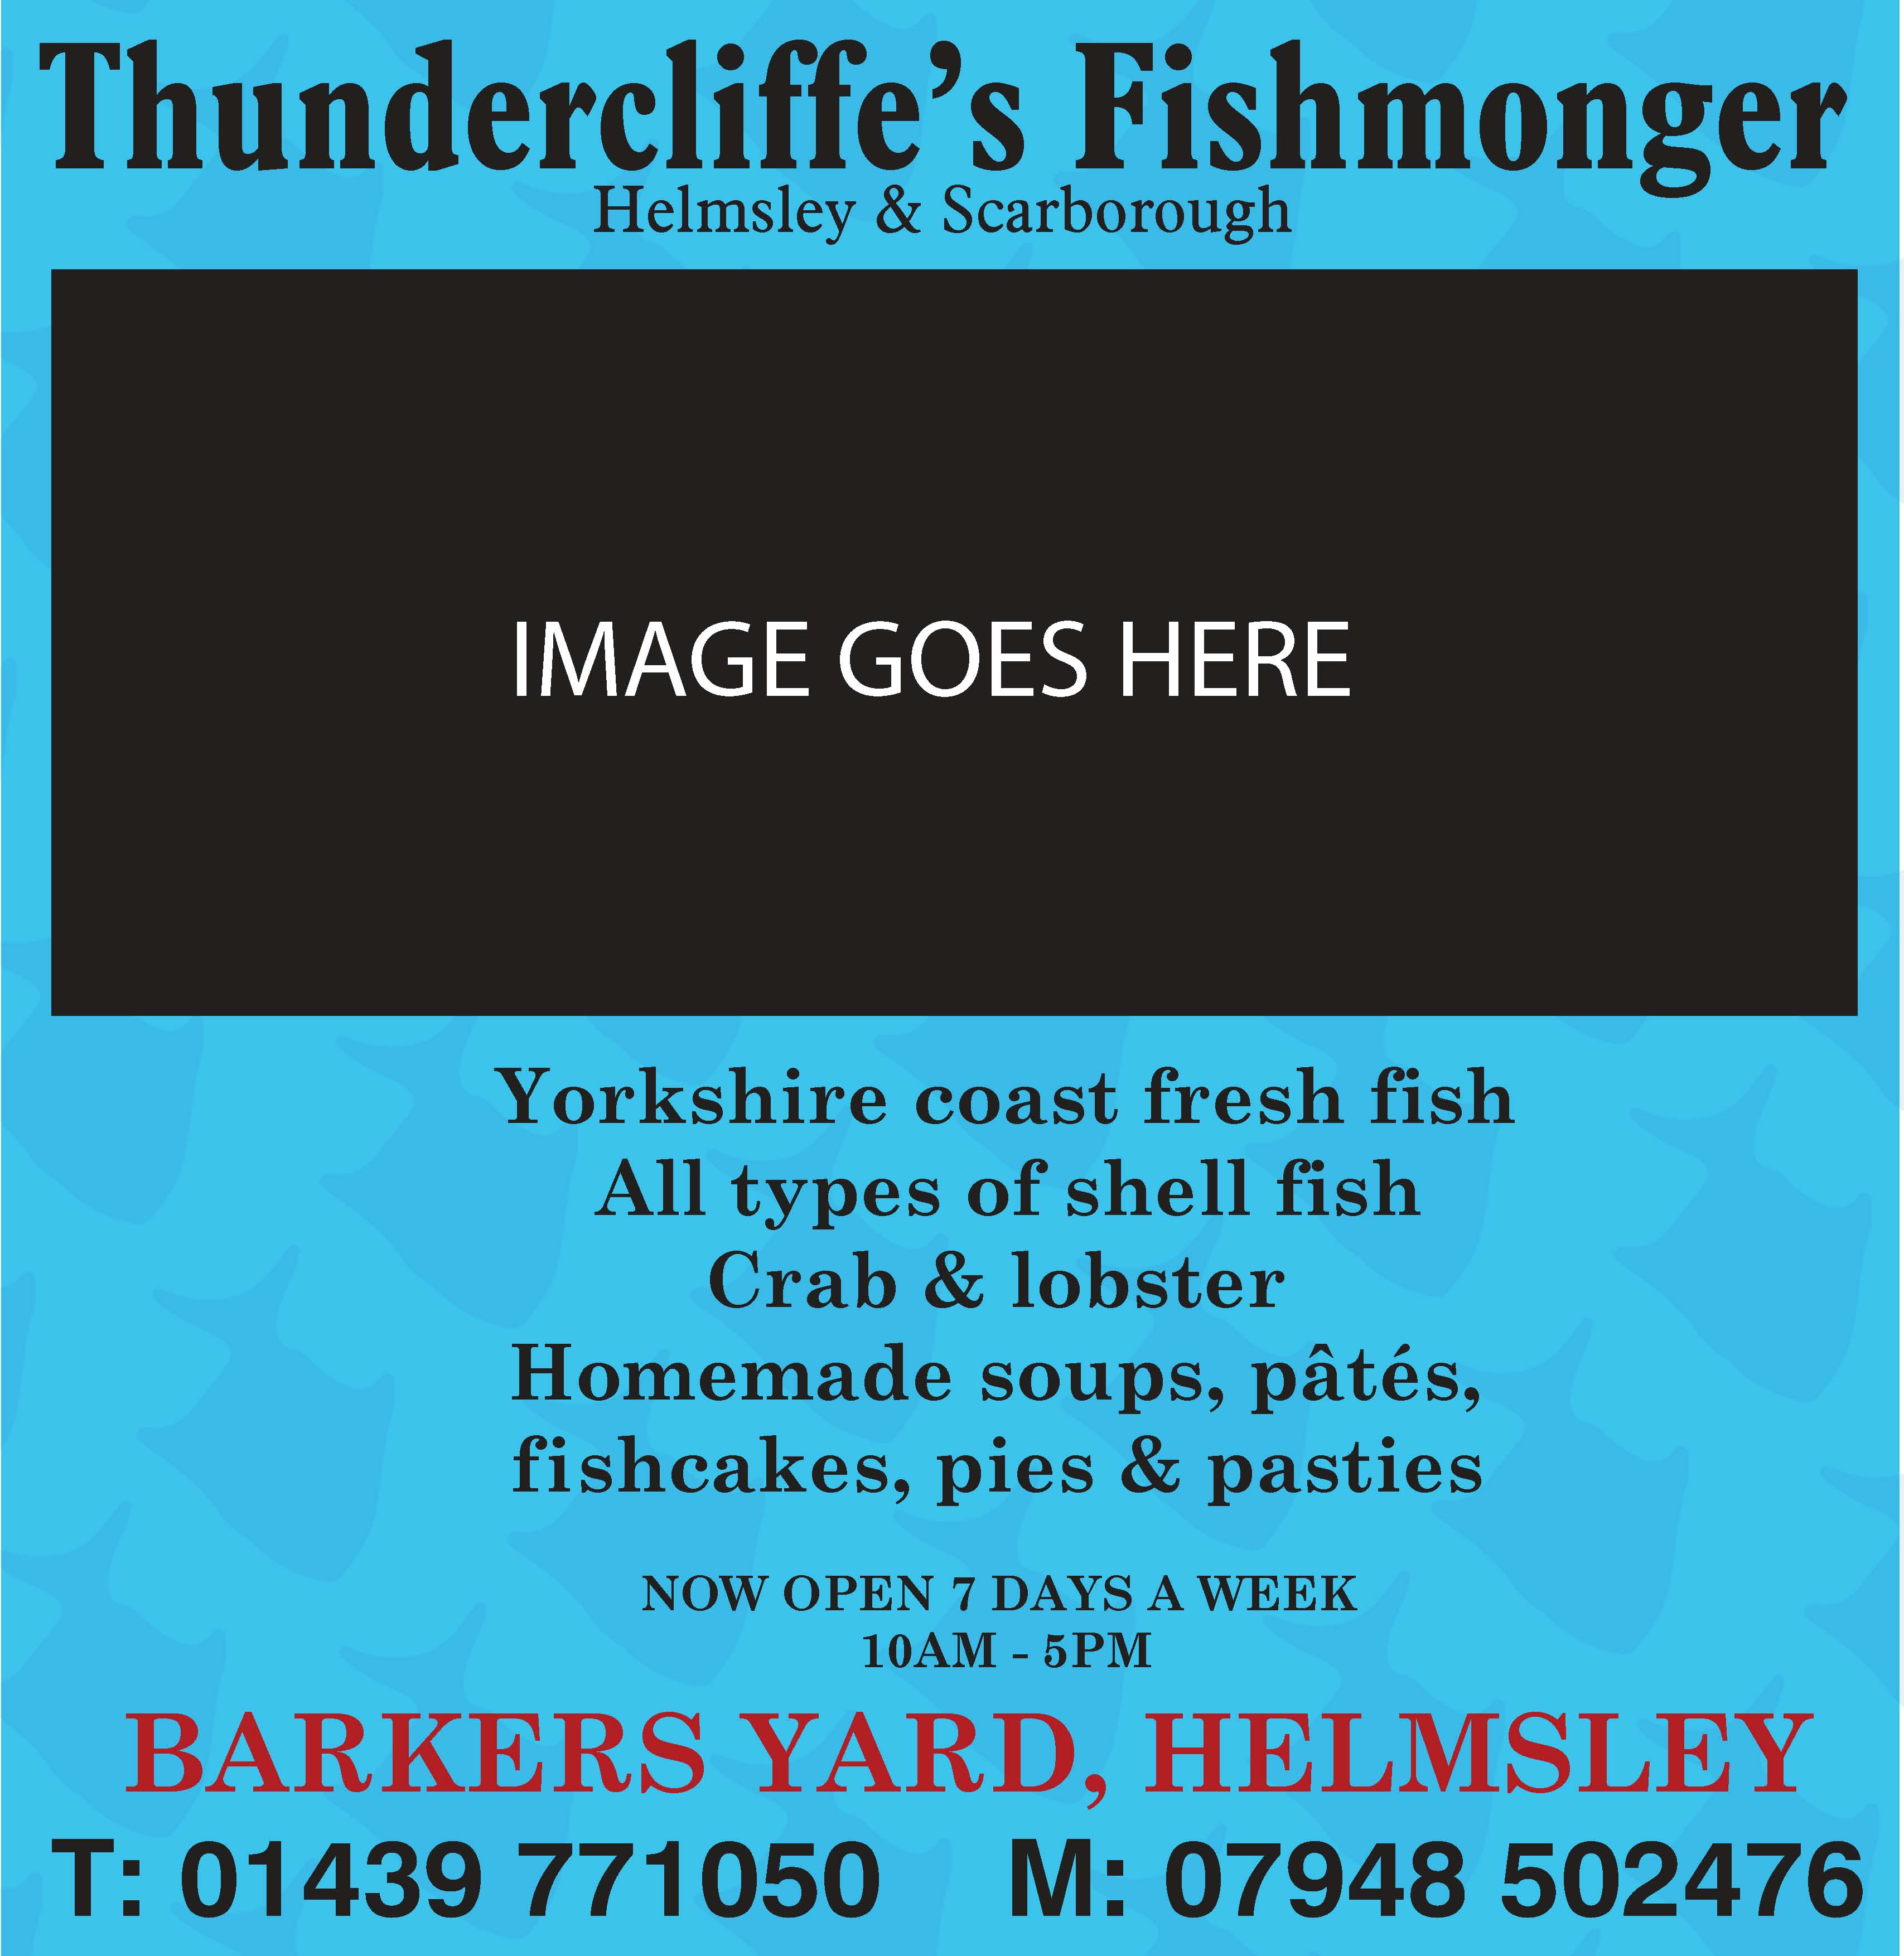 Thundercliffes fishmongers of helmsley